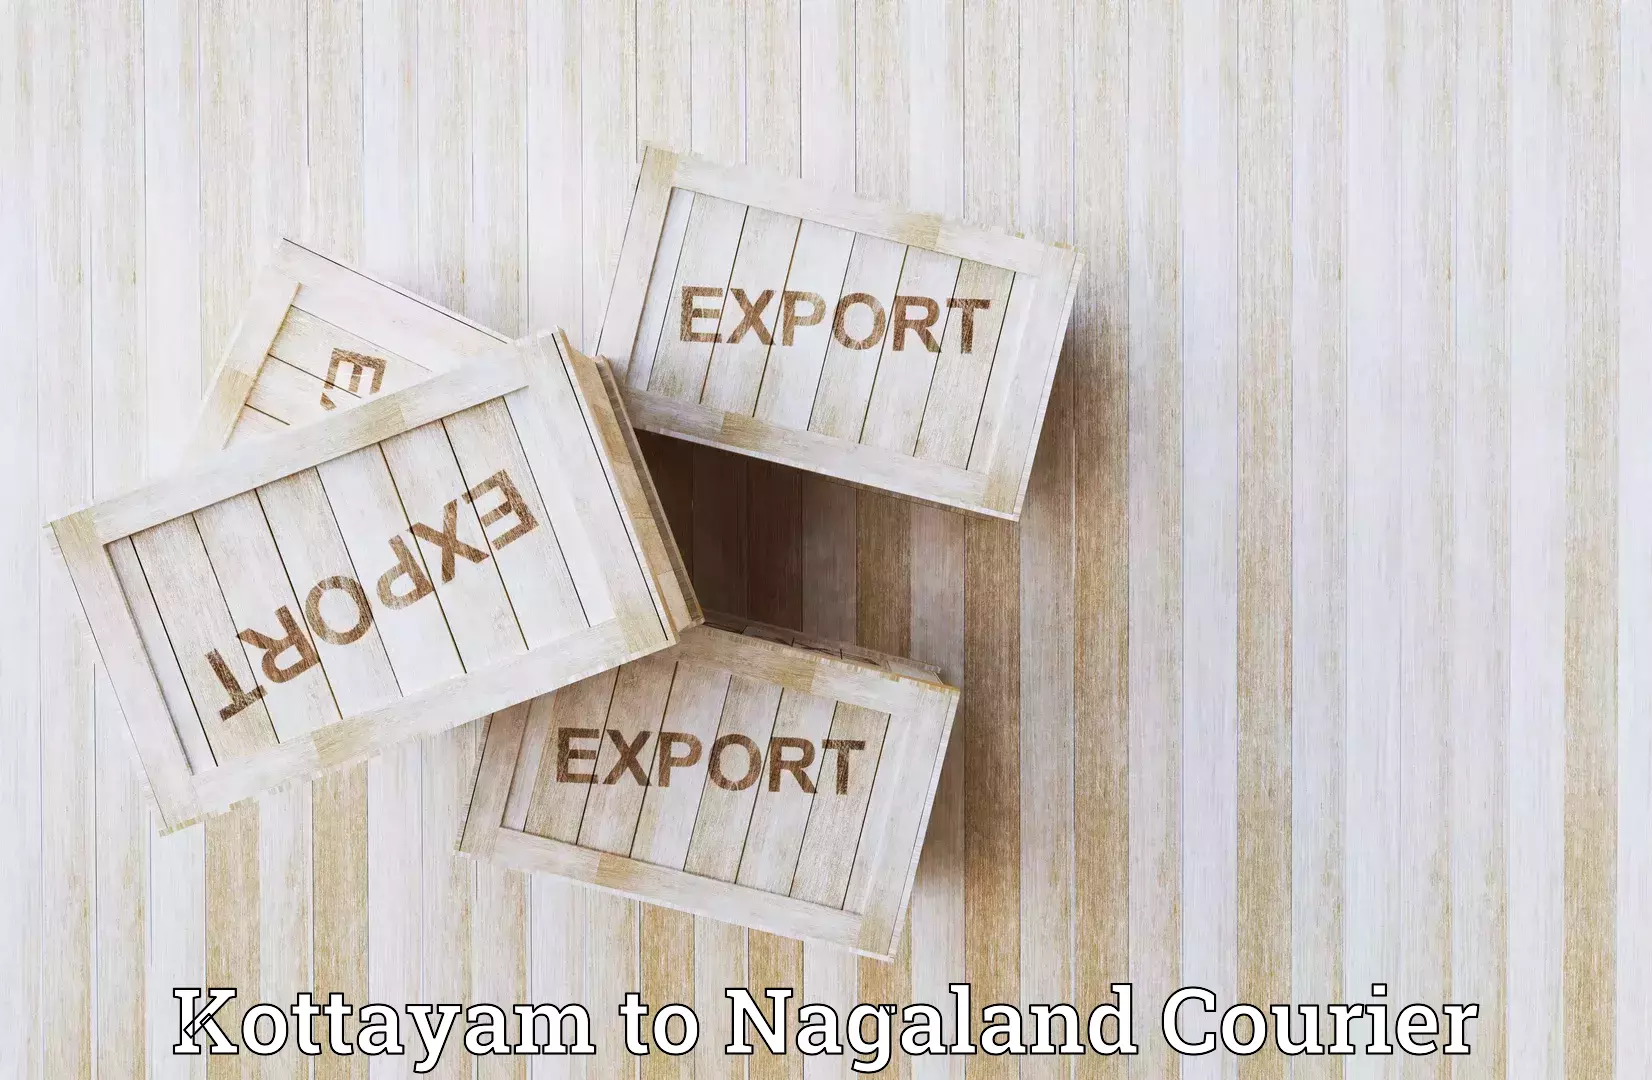 Nationwide courier service Kottayam to Nagaland